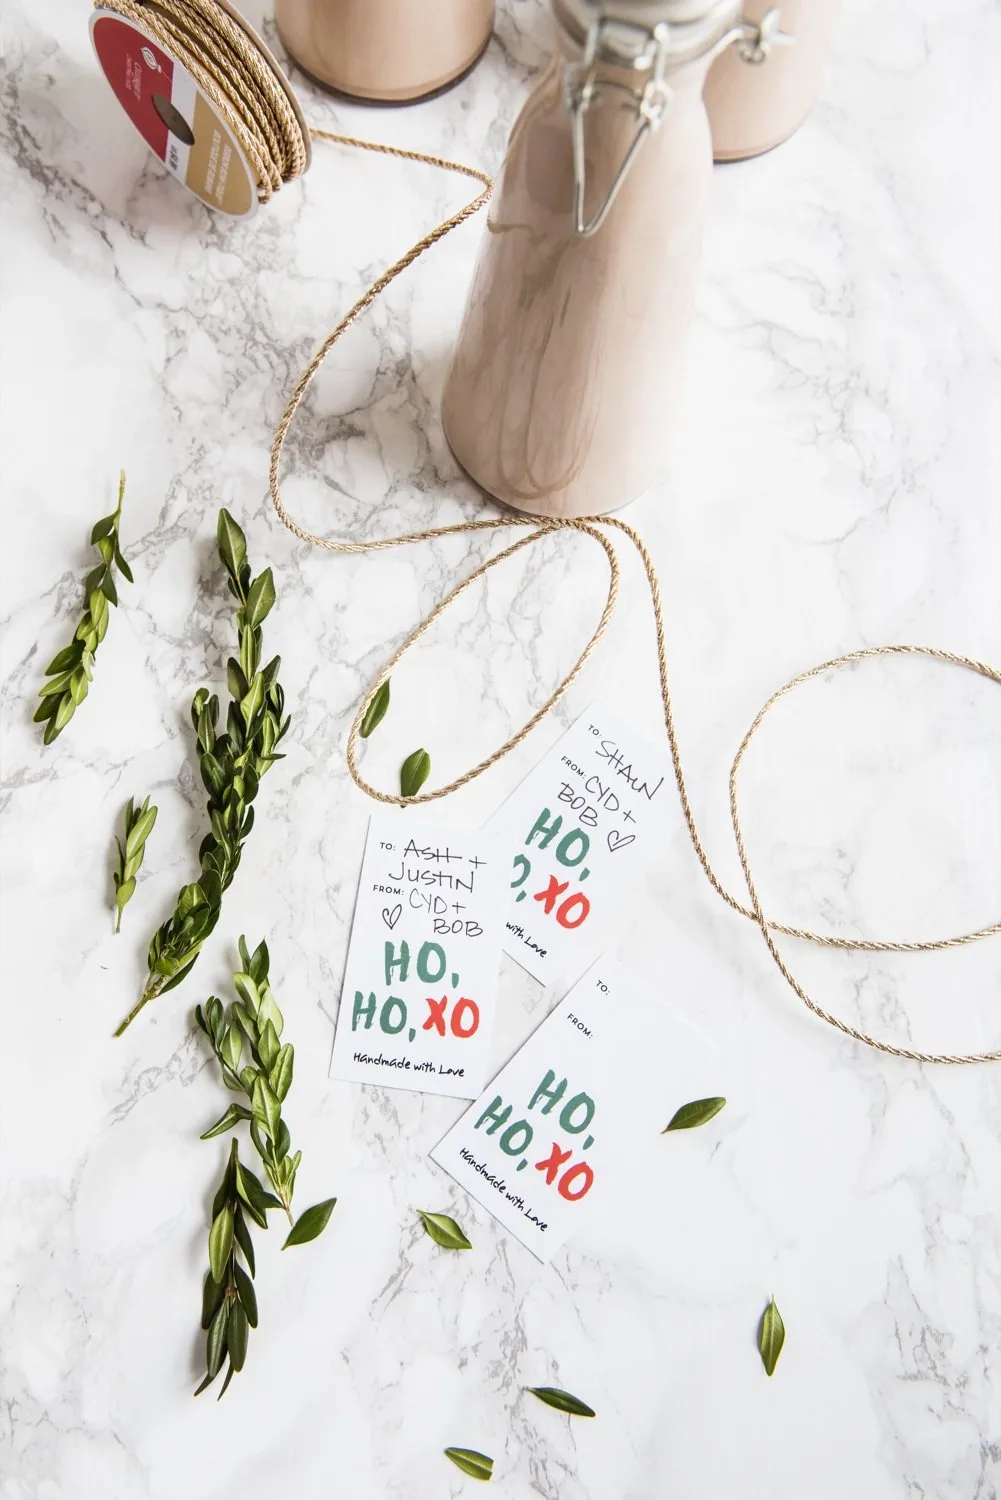 Homemade Christmas Gifts | Homemade Irish Cream Recipe with Free Printables from @cydconverse and @erikafirm